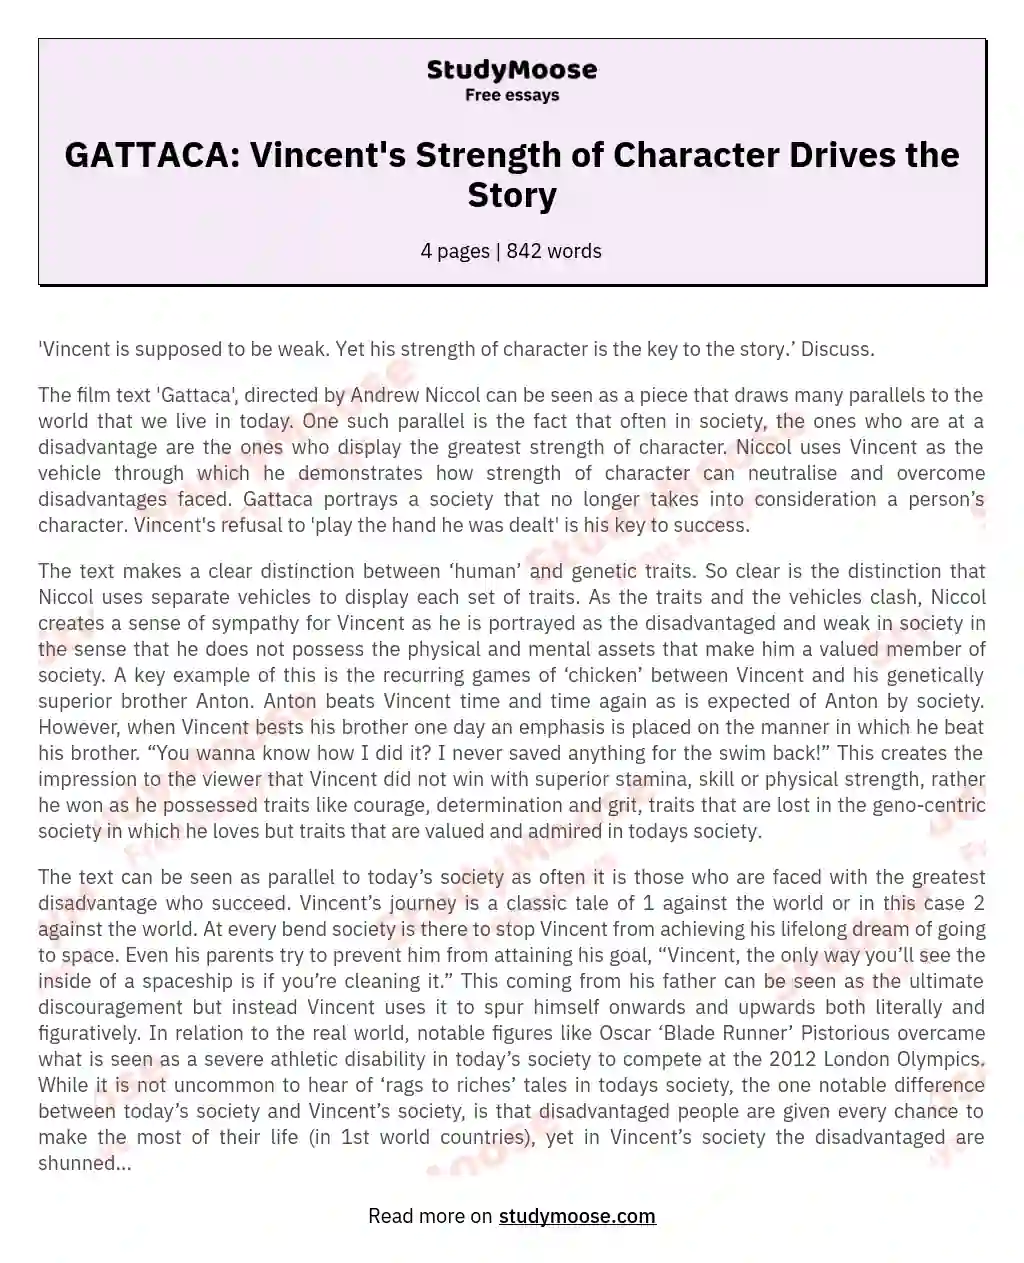 GATTACA: Vincent's Strength of Character Drives the Story